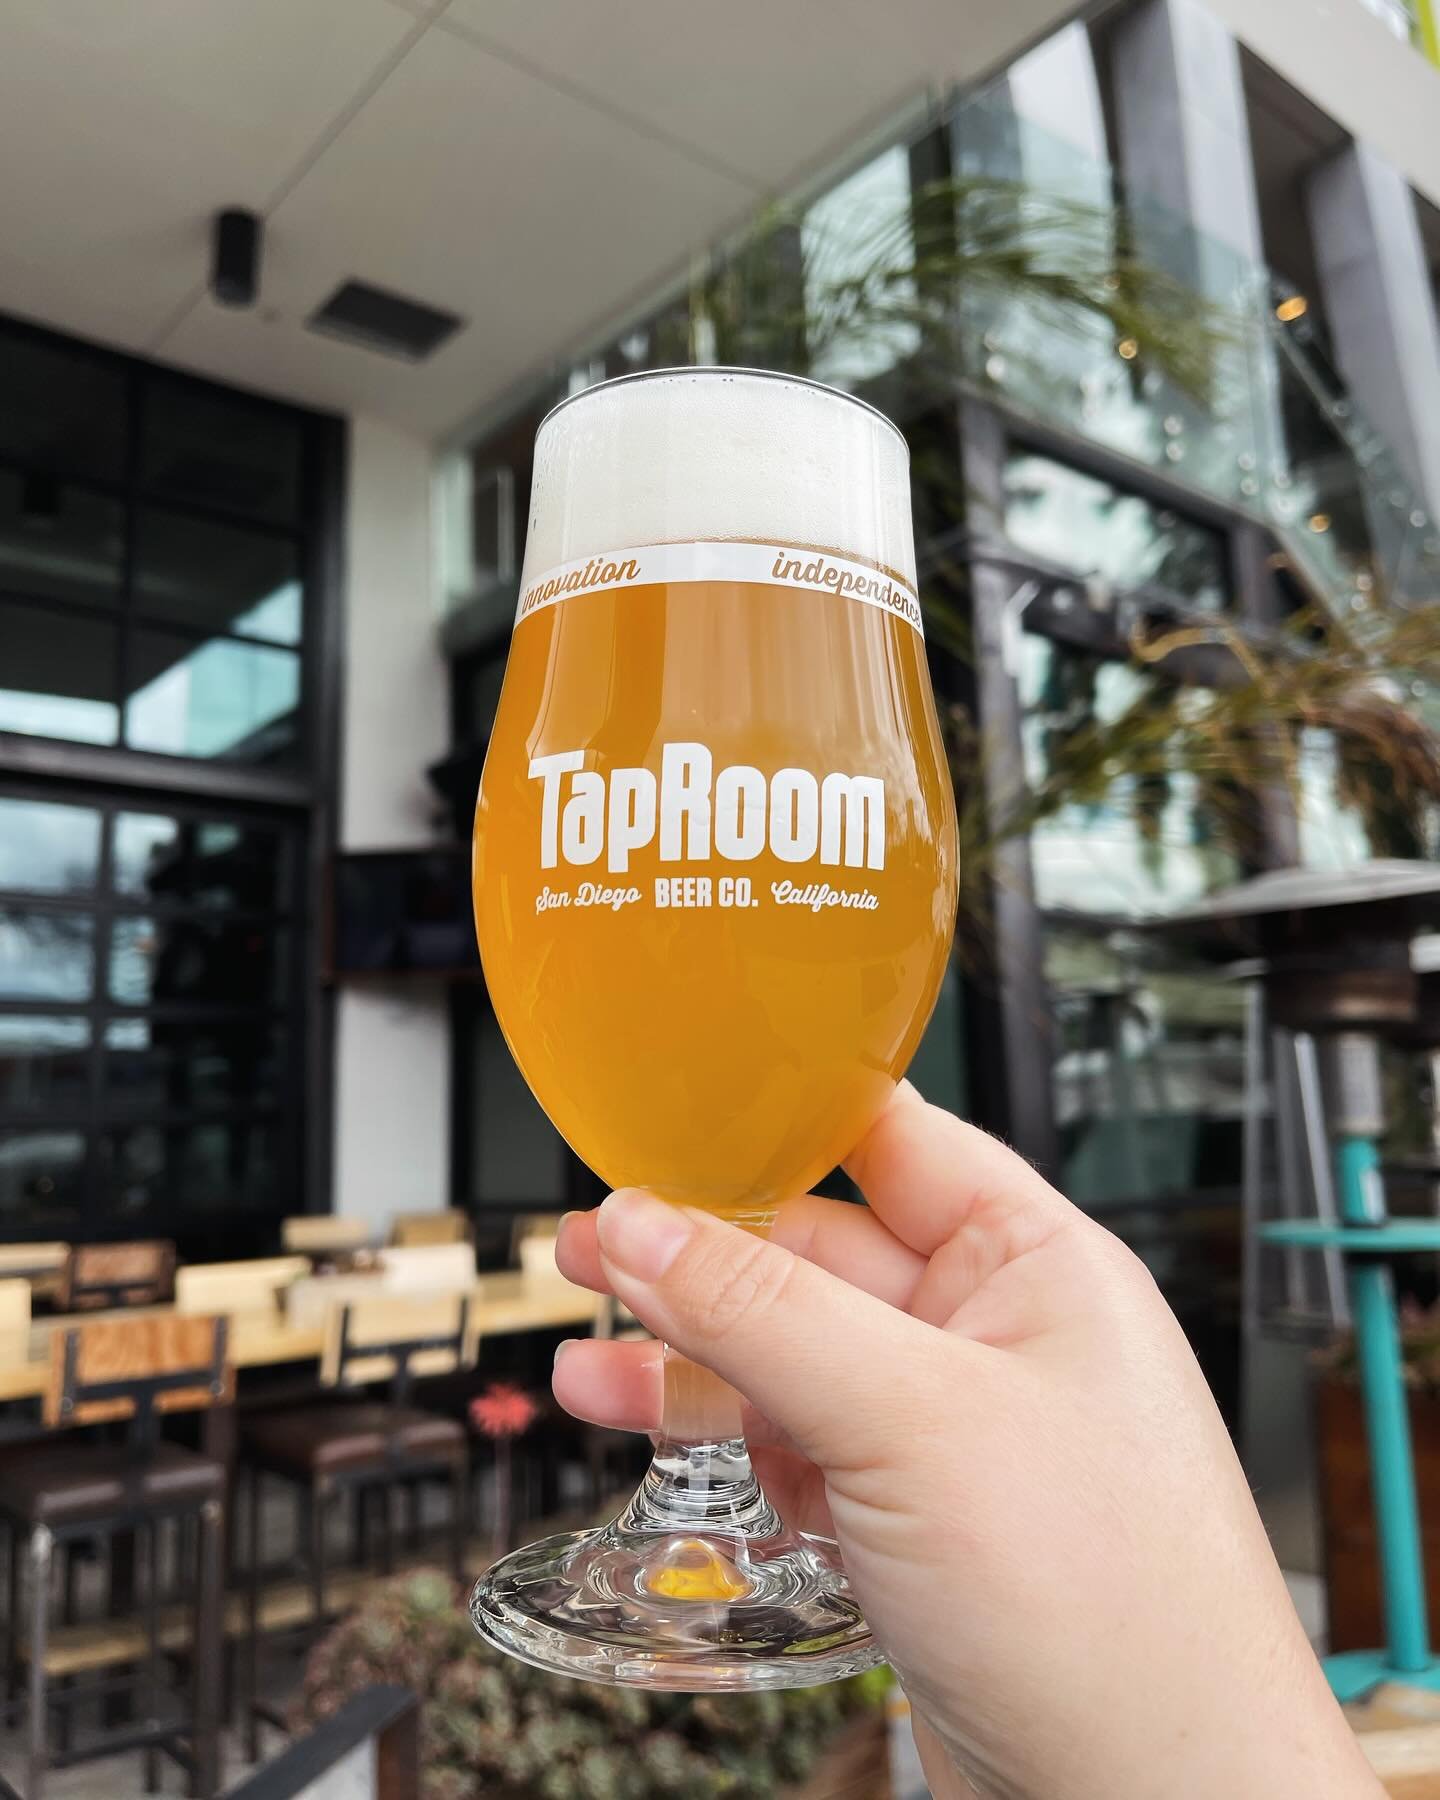 ➡️ NOW AVAILABLE (AGAIN)! ⬅️

Tis the season for TapRoom White! She&rsquo;s back, y&rsquo;all! One of our fav seasonal brews, TapRoom White is a 5.6% ABV Belgian-style Witbier Brewed w/ Coriander, Candied Ginger, Oro Blanco Grapefruit zest, &amp; fre